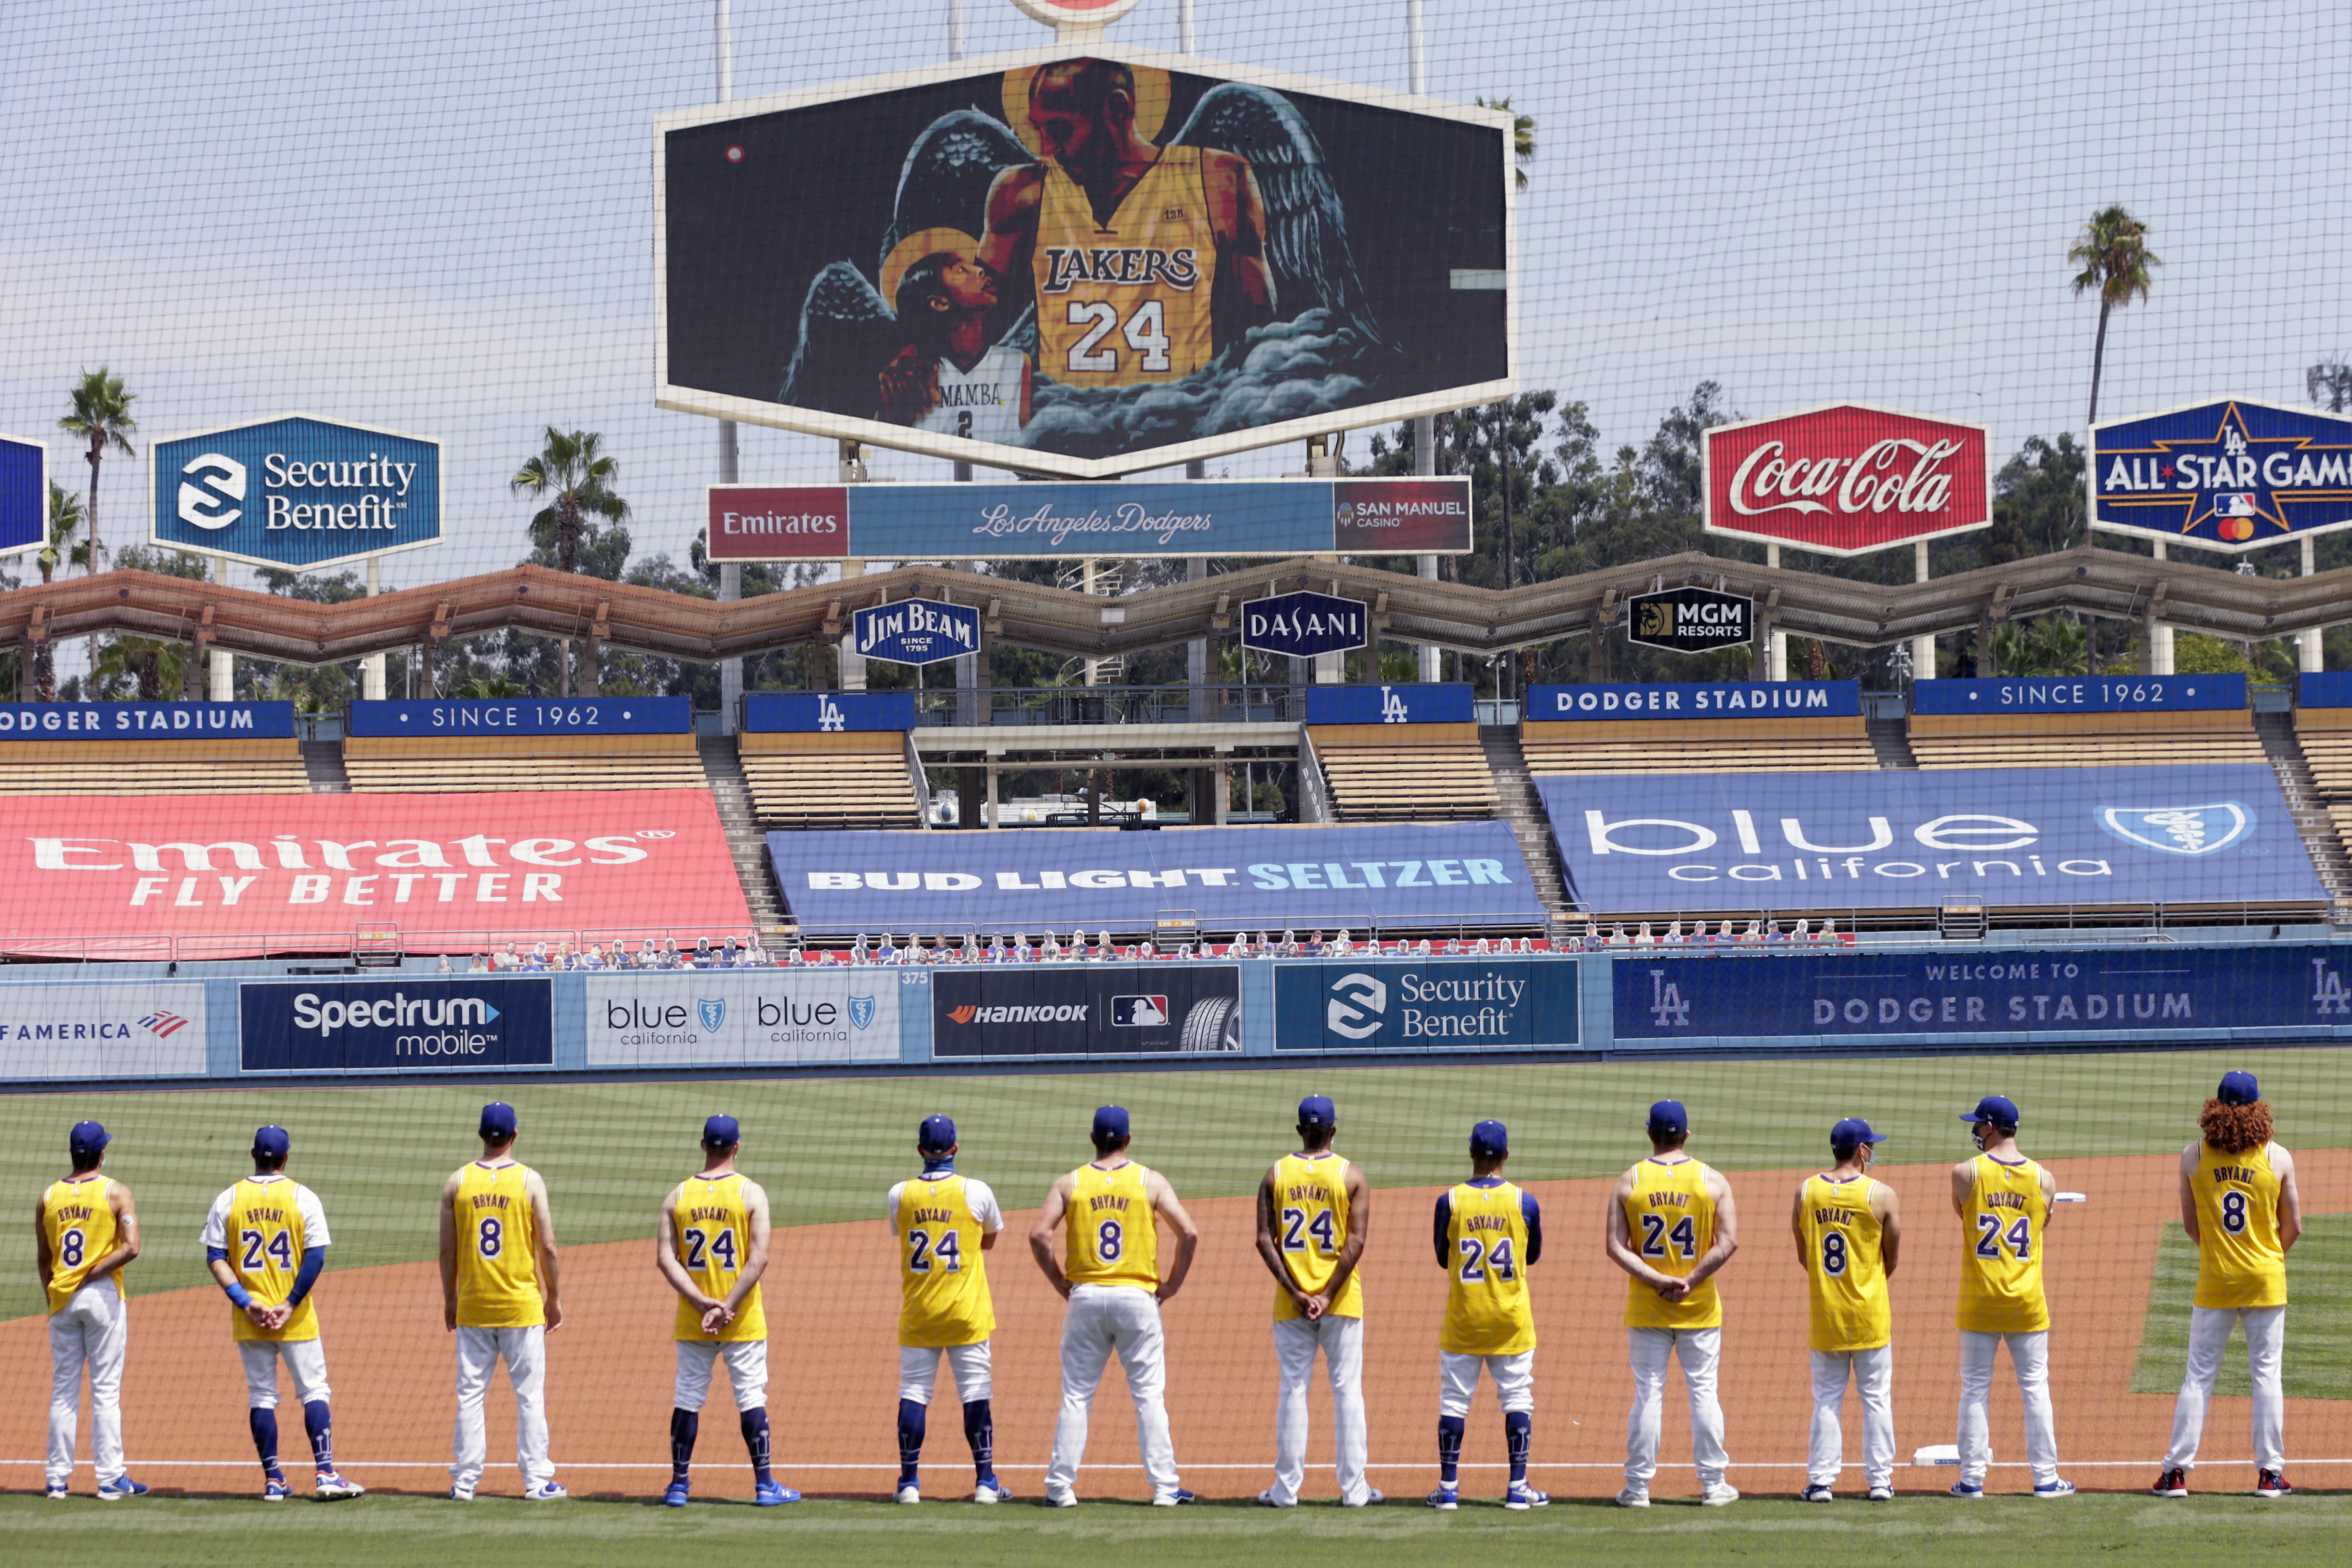 Kobe Bryant threw first pitch at Dodger Stadium in 2000. Now his